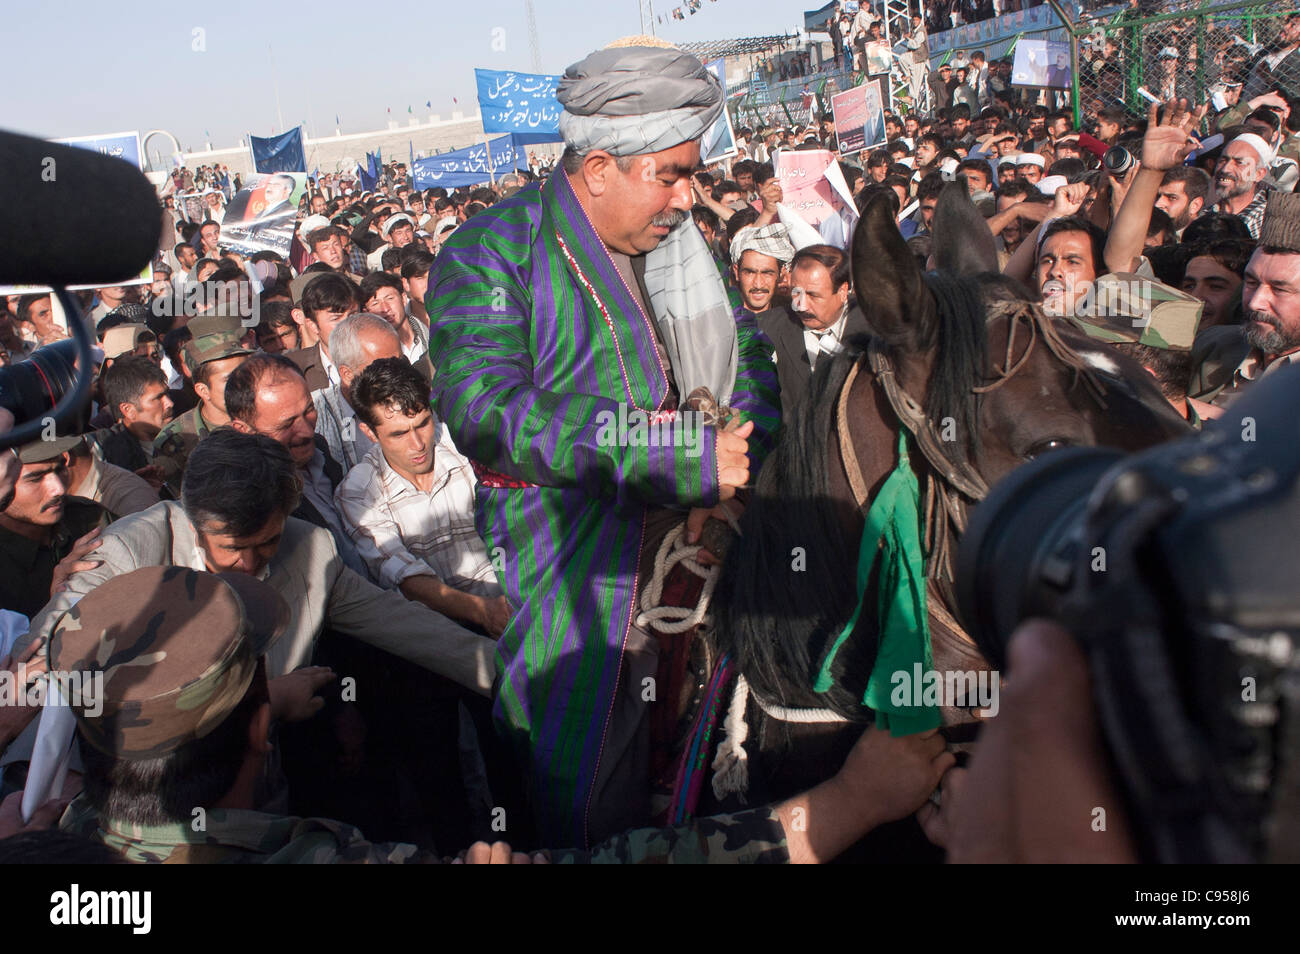 Afghan Uzbek commander and Presidential candidate Abdul Rashid Dostum sits on his horse during a campaign rally in Kabul stadium Stock Photo